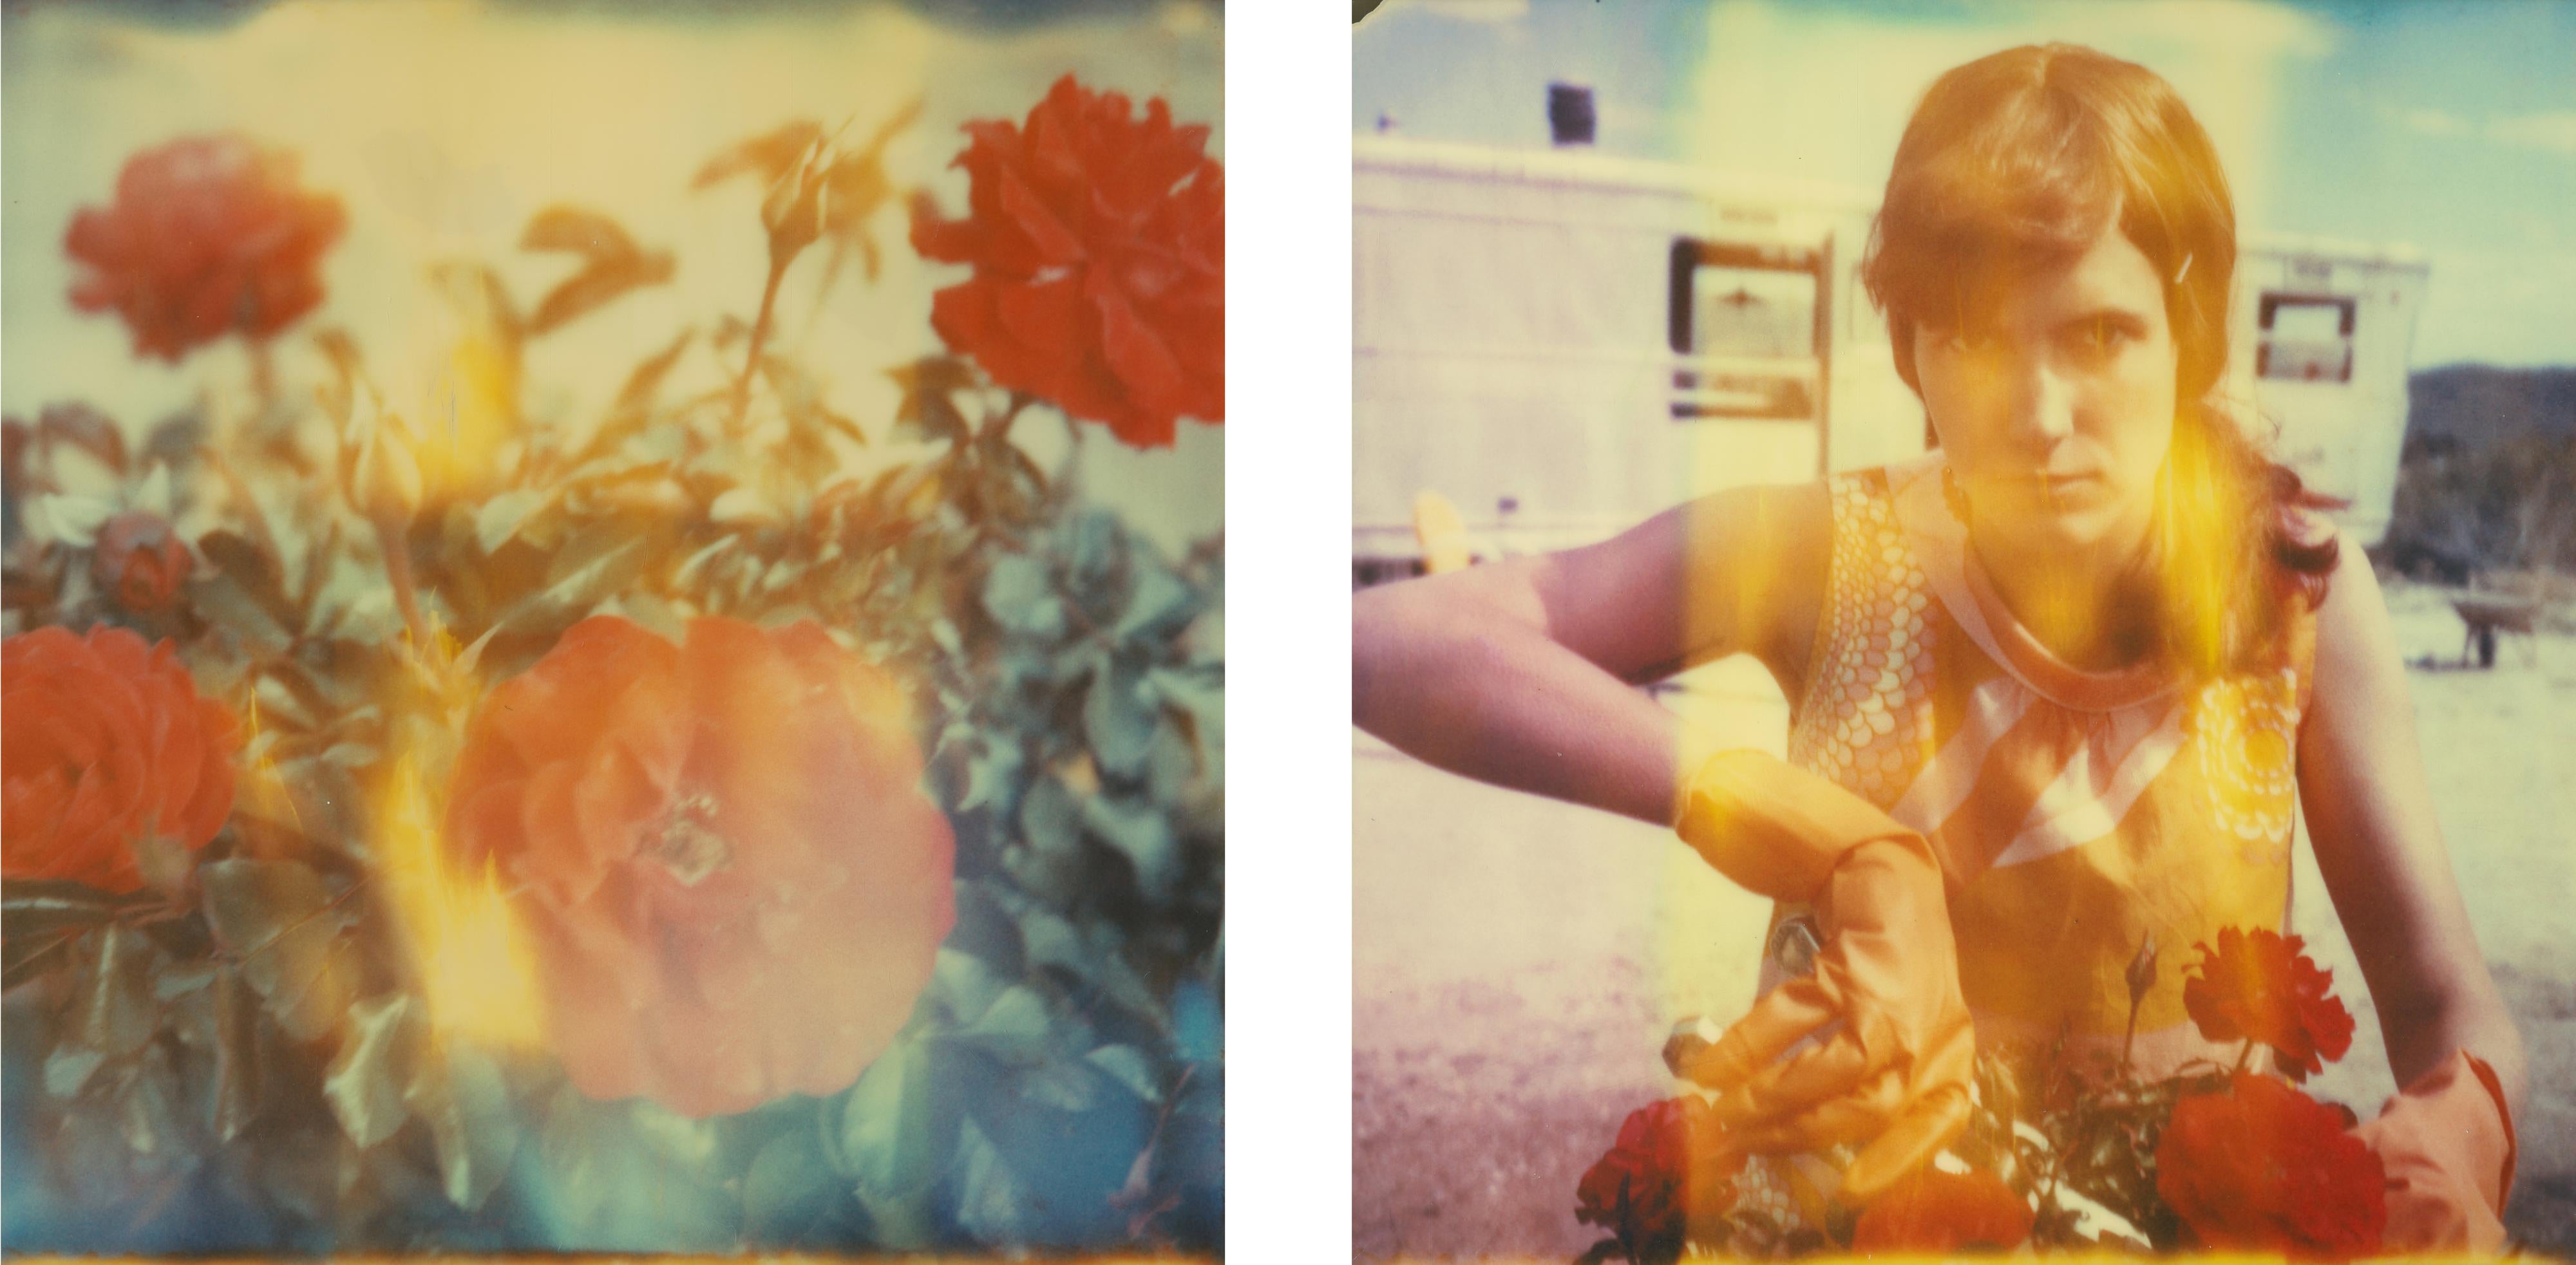 Stefanie Schneider Color Photograph - One Day I'll leave (The Girl behind the White Picket Fence) diptych - Polaroid